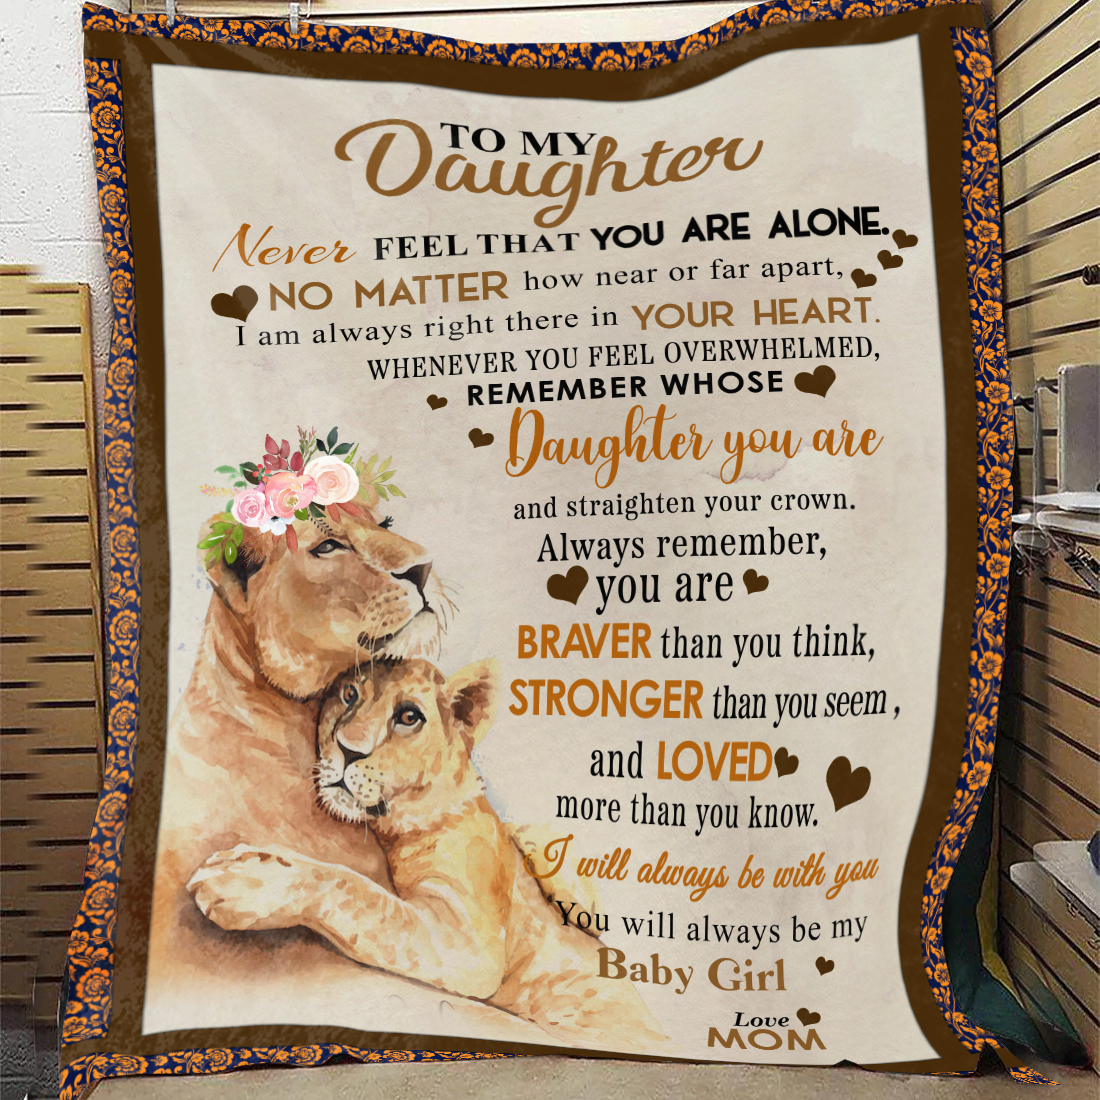 To My Daughter - You Are Braver Premium Mink Sherpa Blanket 50x60